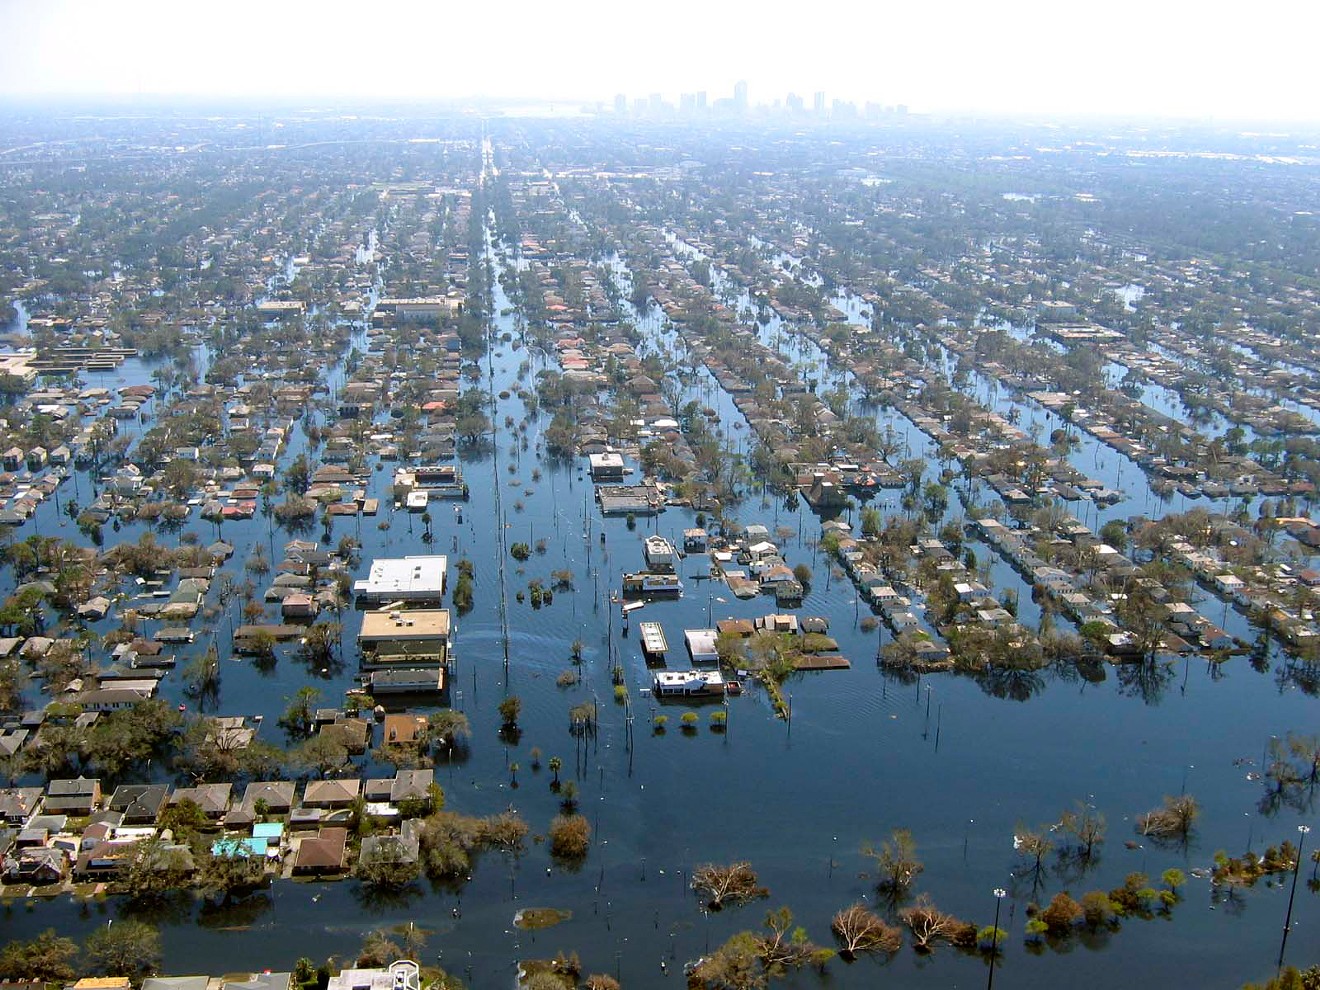 As coastal areas become flooded by 2100, Phoenix could experience an economic boost.